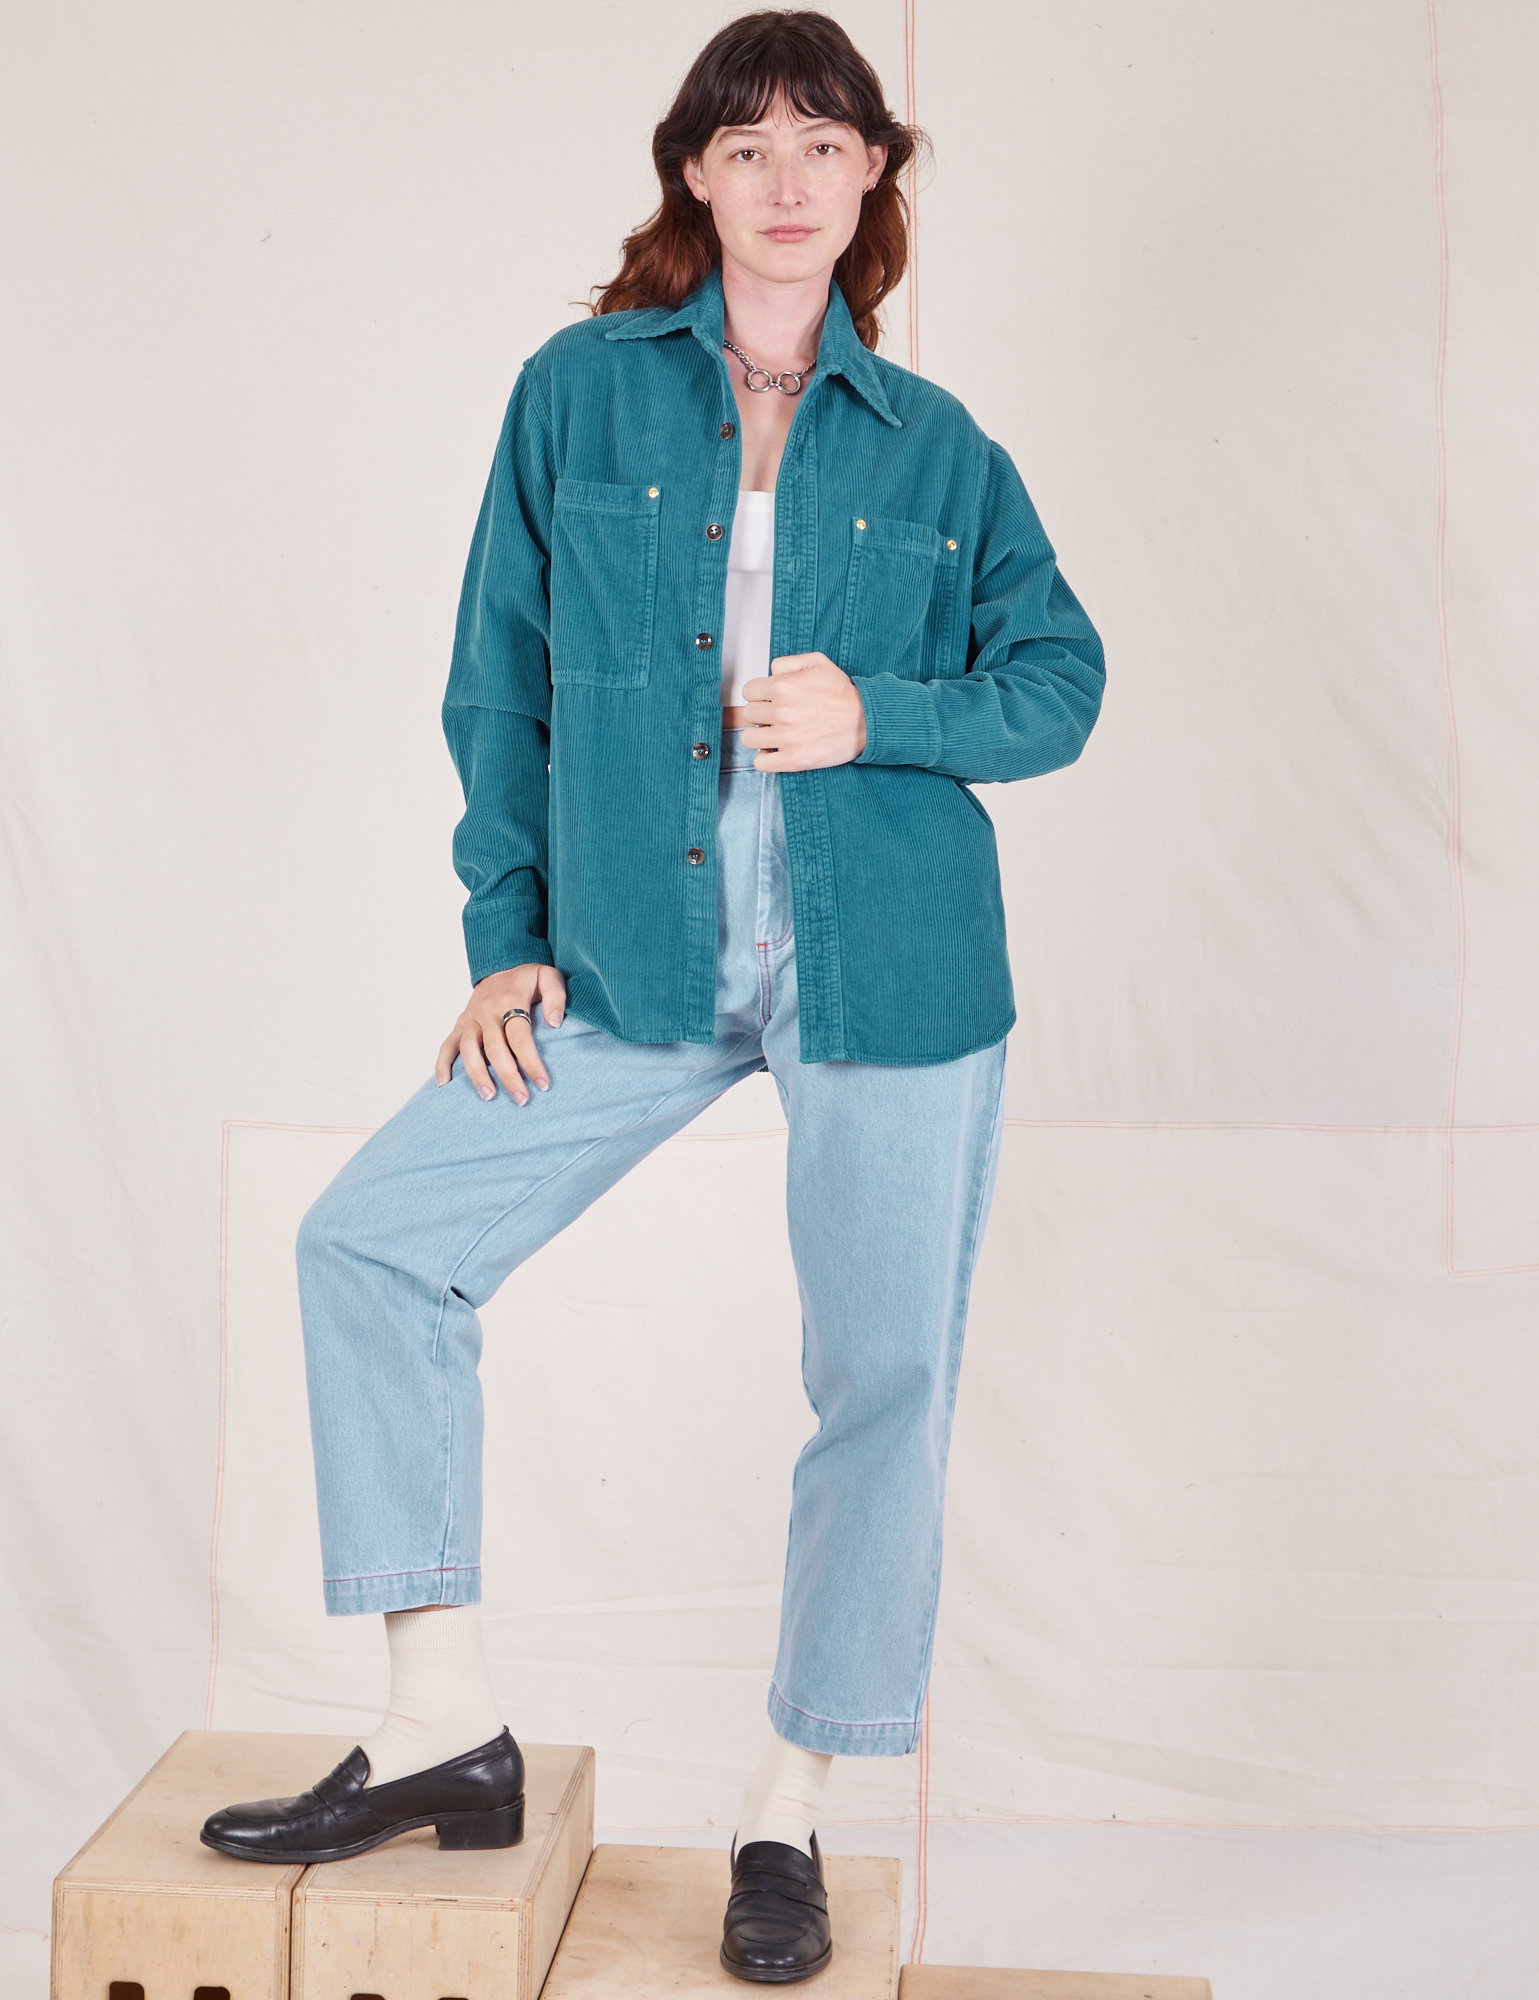 Alex is wearing Corduroy Overshirt in Marine Blue paired with light wash Denim Trouser Jeans